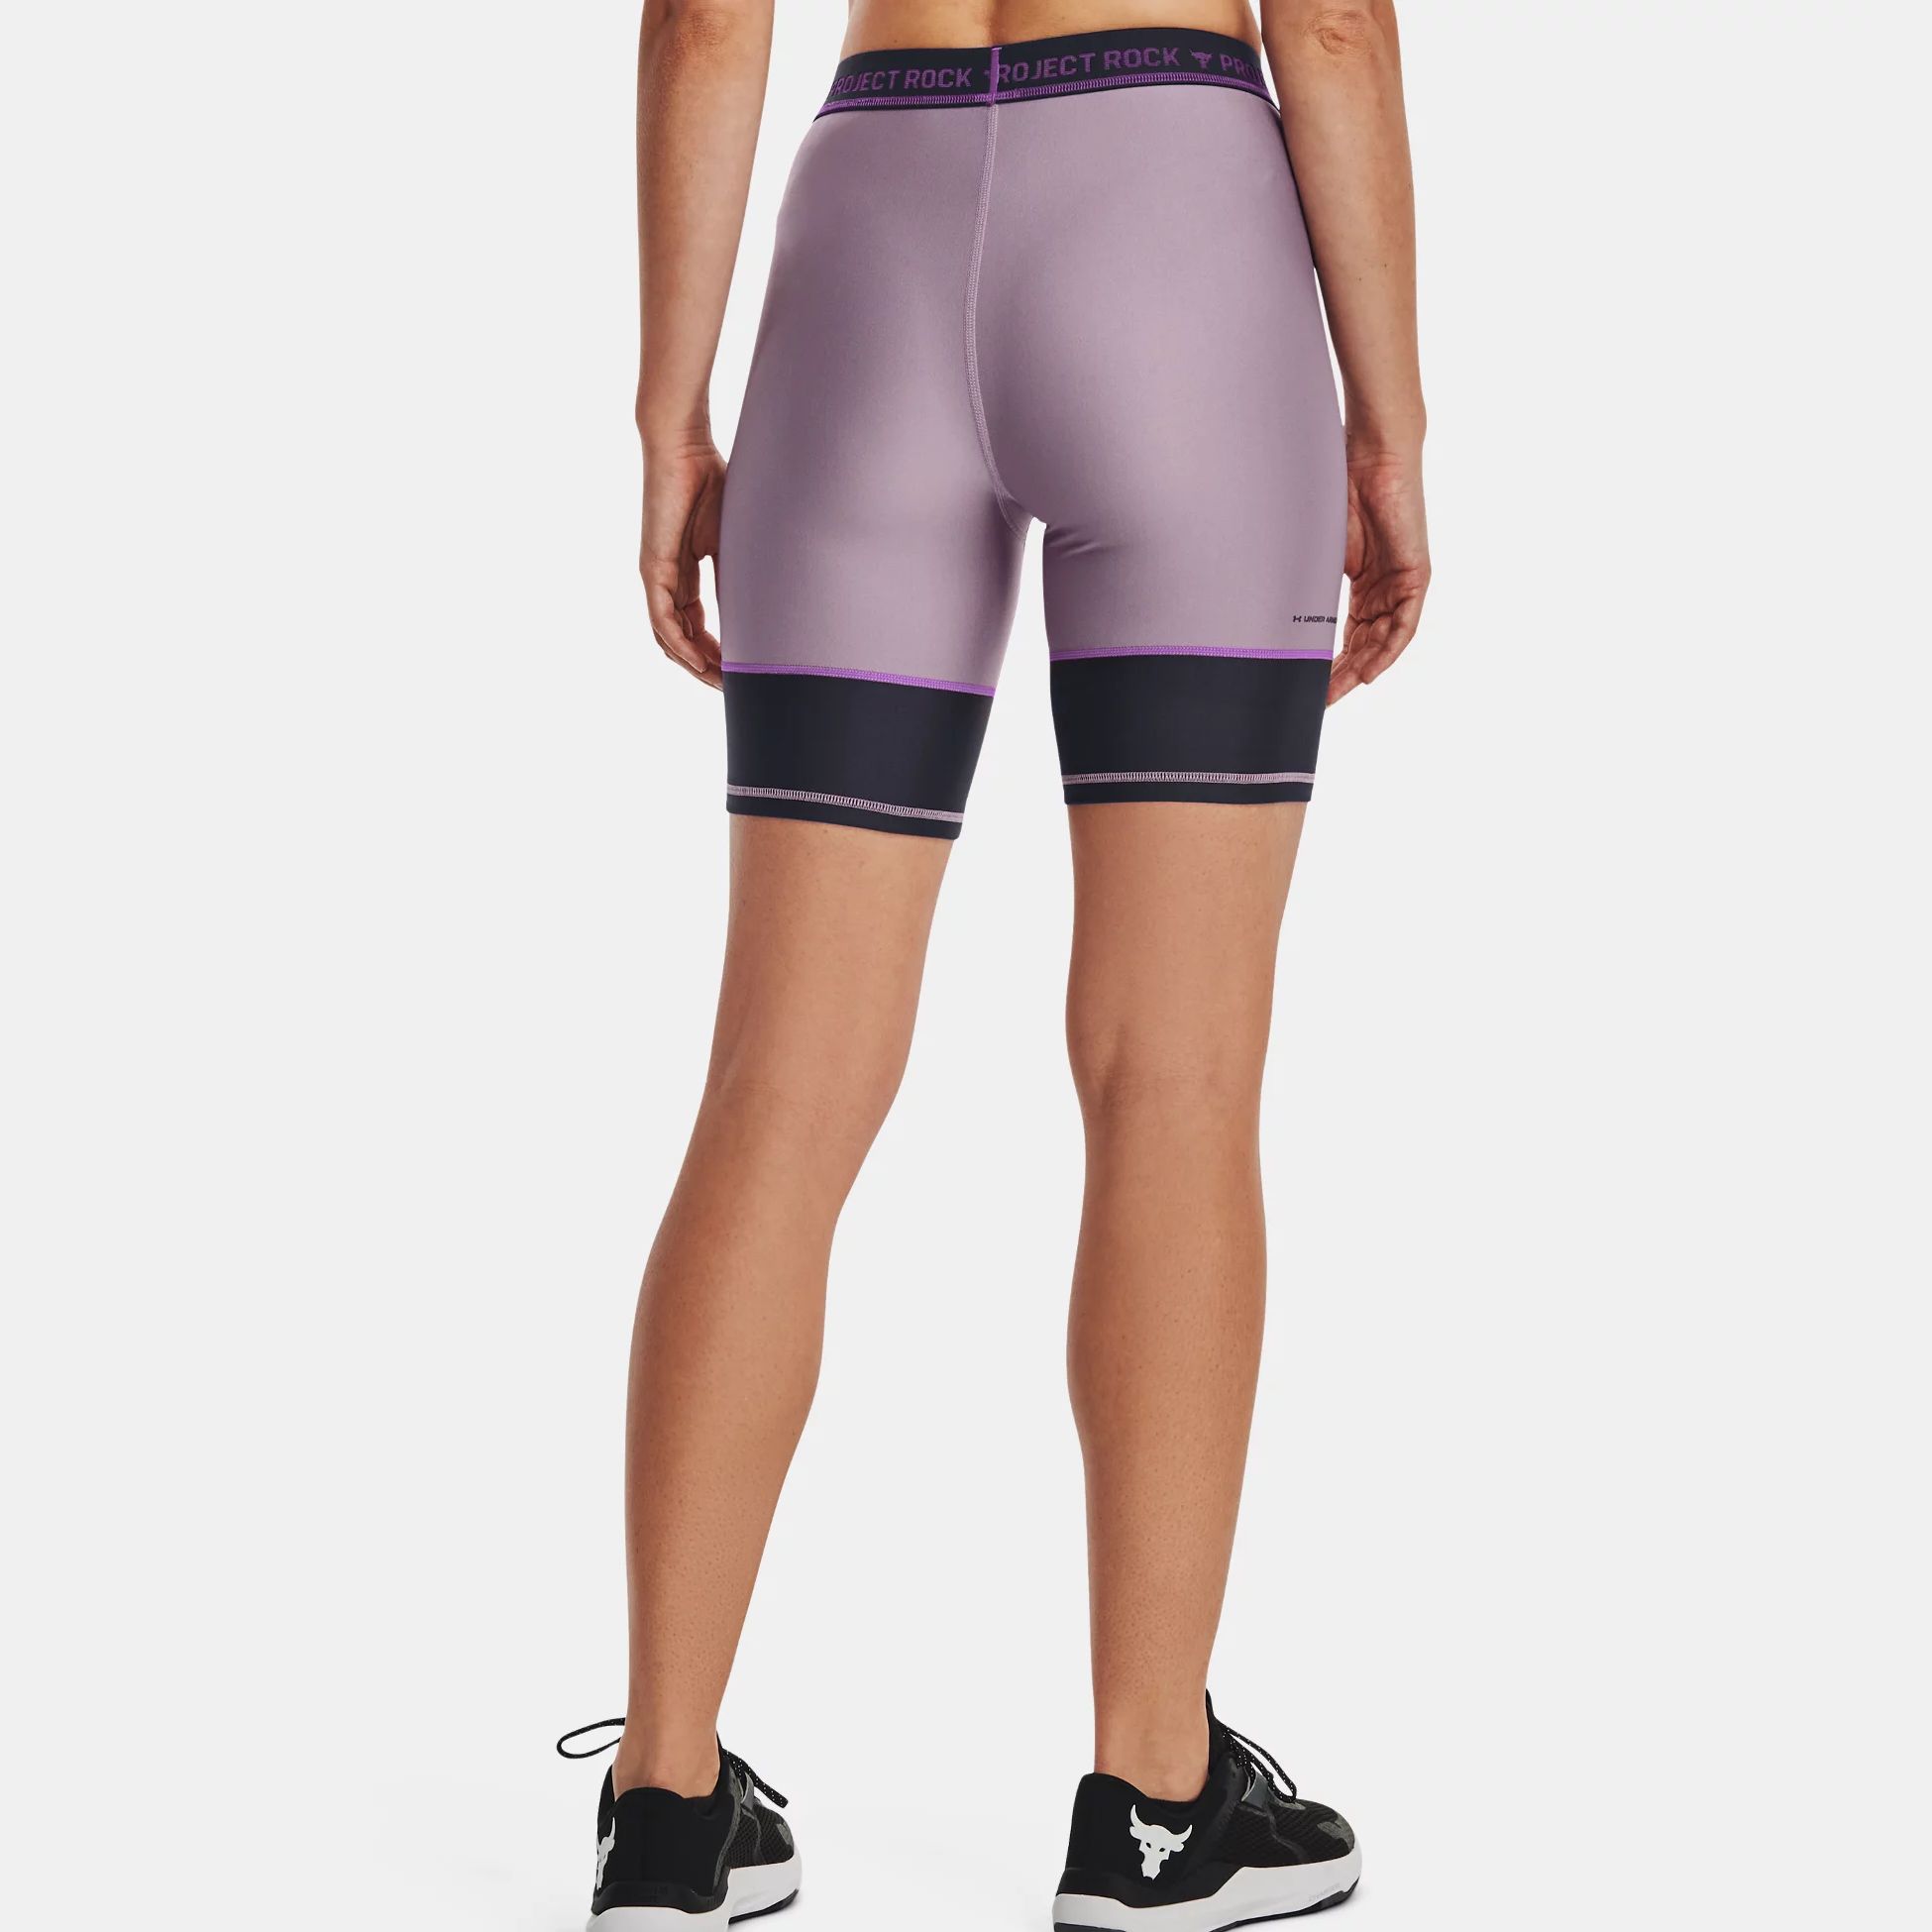 Leggings & Tights, Under armour Project Rock Bike Shorts